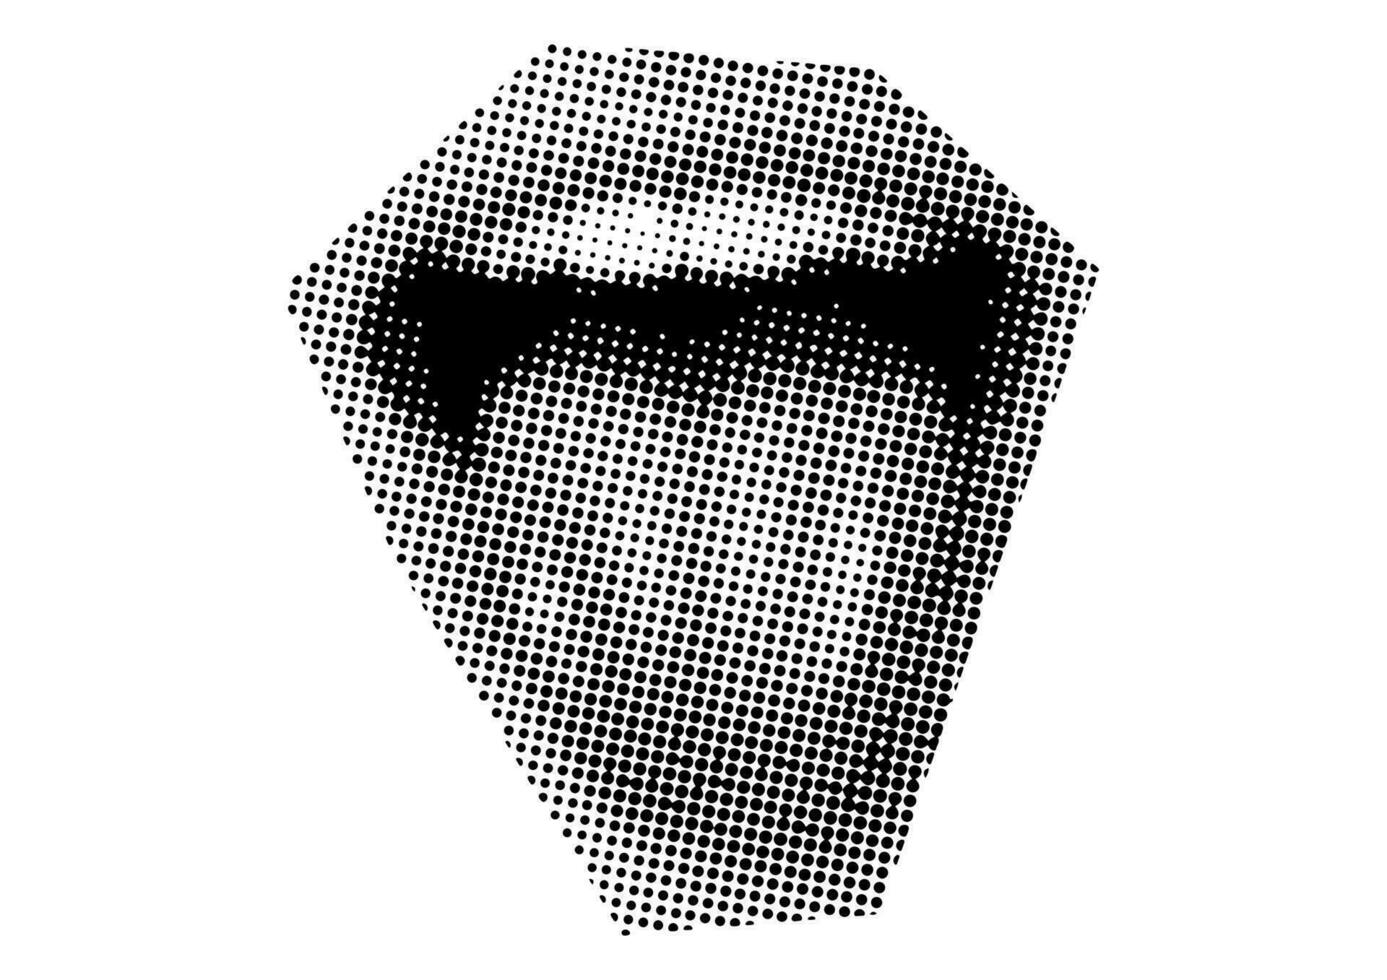 Mouth and lips, smile, tongue, dots Punk y2k black and white collage elements vector